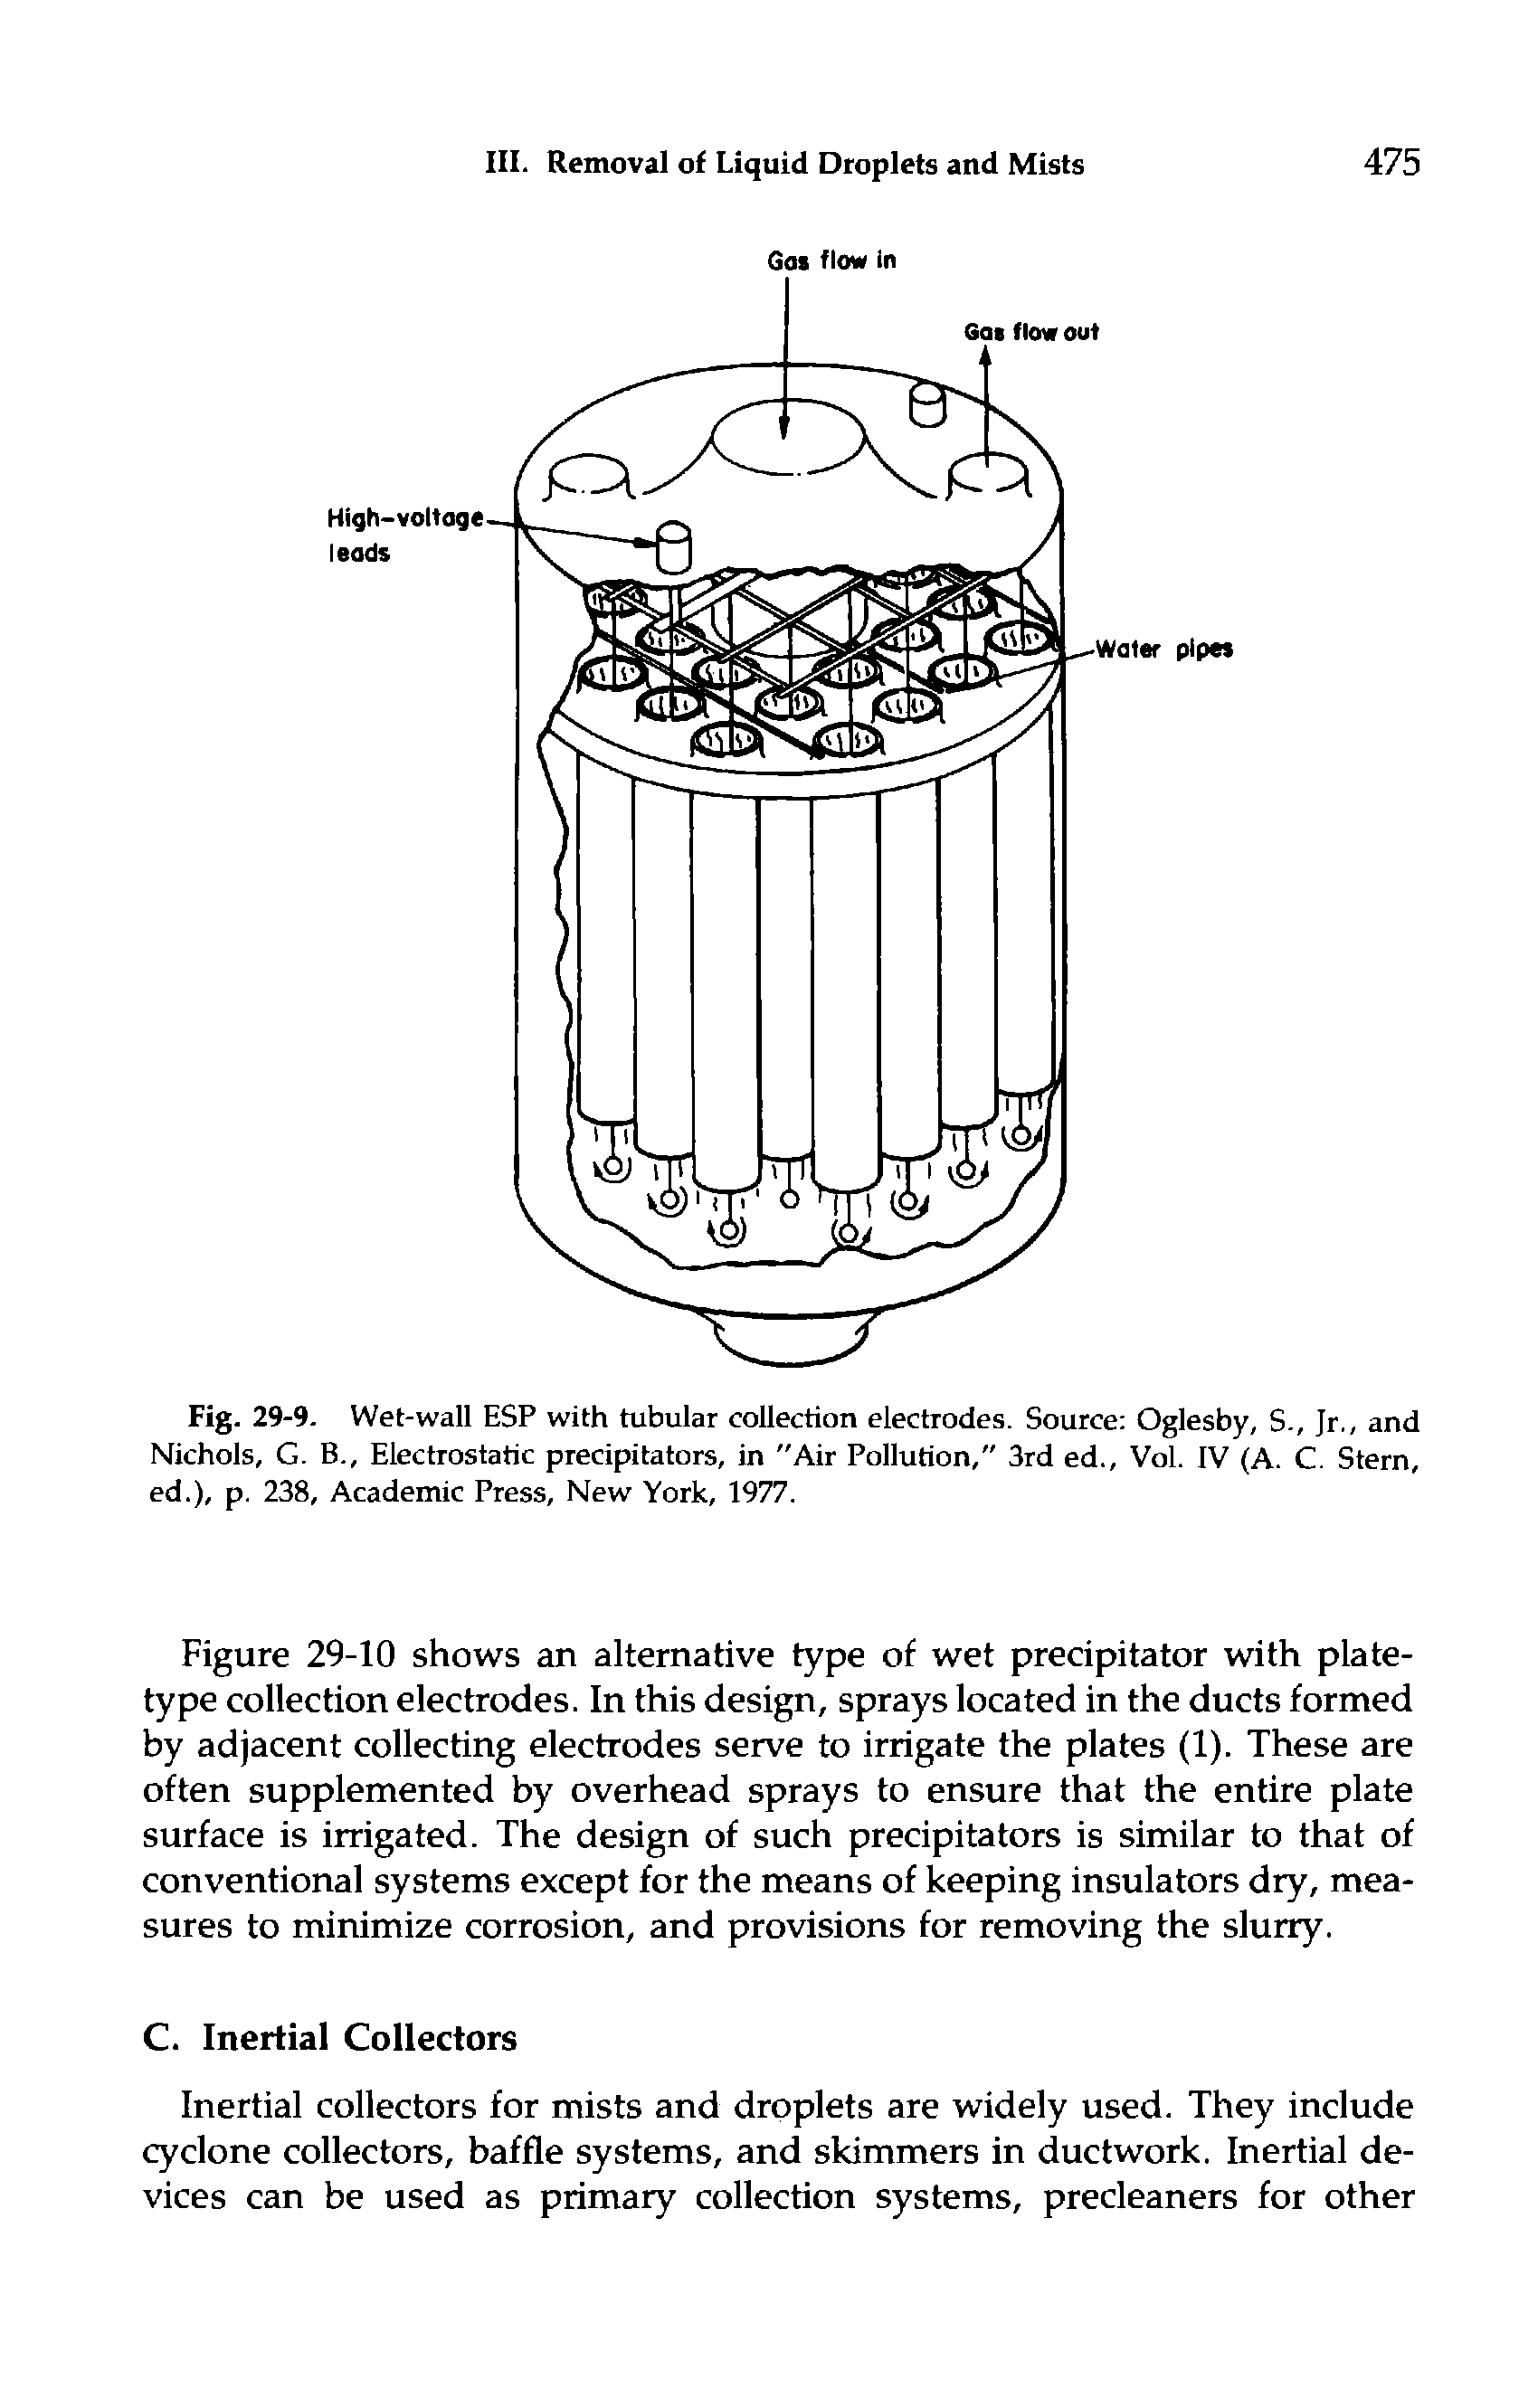 Fig. 29-9. Wet-wall ESP with tubular collection electrodes. Source Oglesby, S., Jr, and Nichols, G. B., Electrostatic precipitators, in "Air Pollution," 3rd ed., Vol. IV (A. C. Stern, ed.), p. 238, Academic Press, New York, 1977.